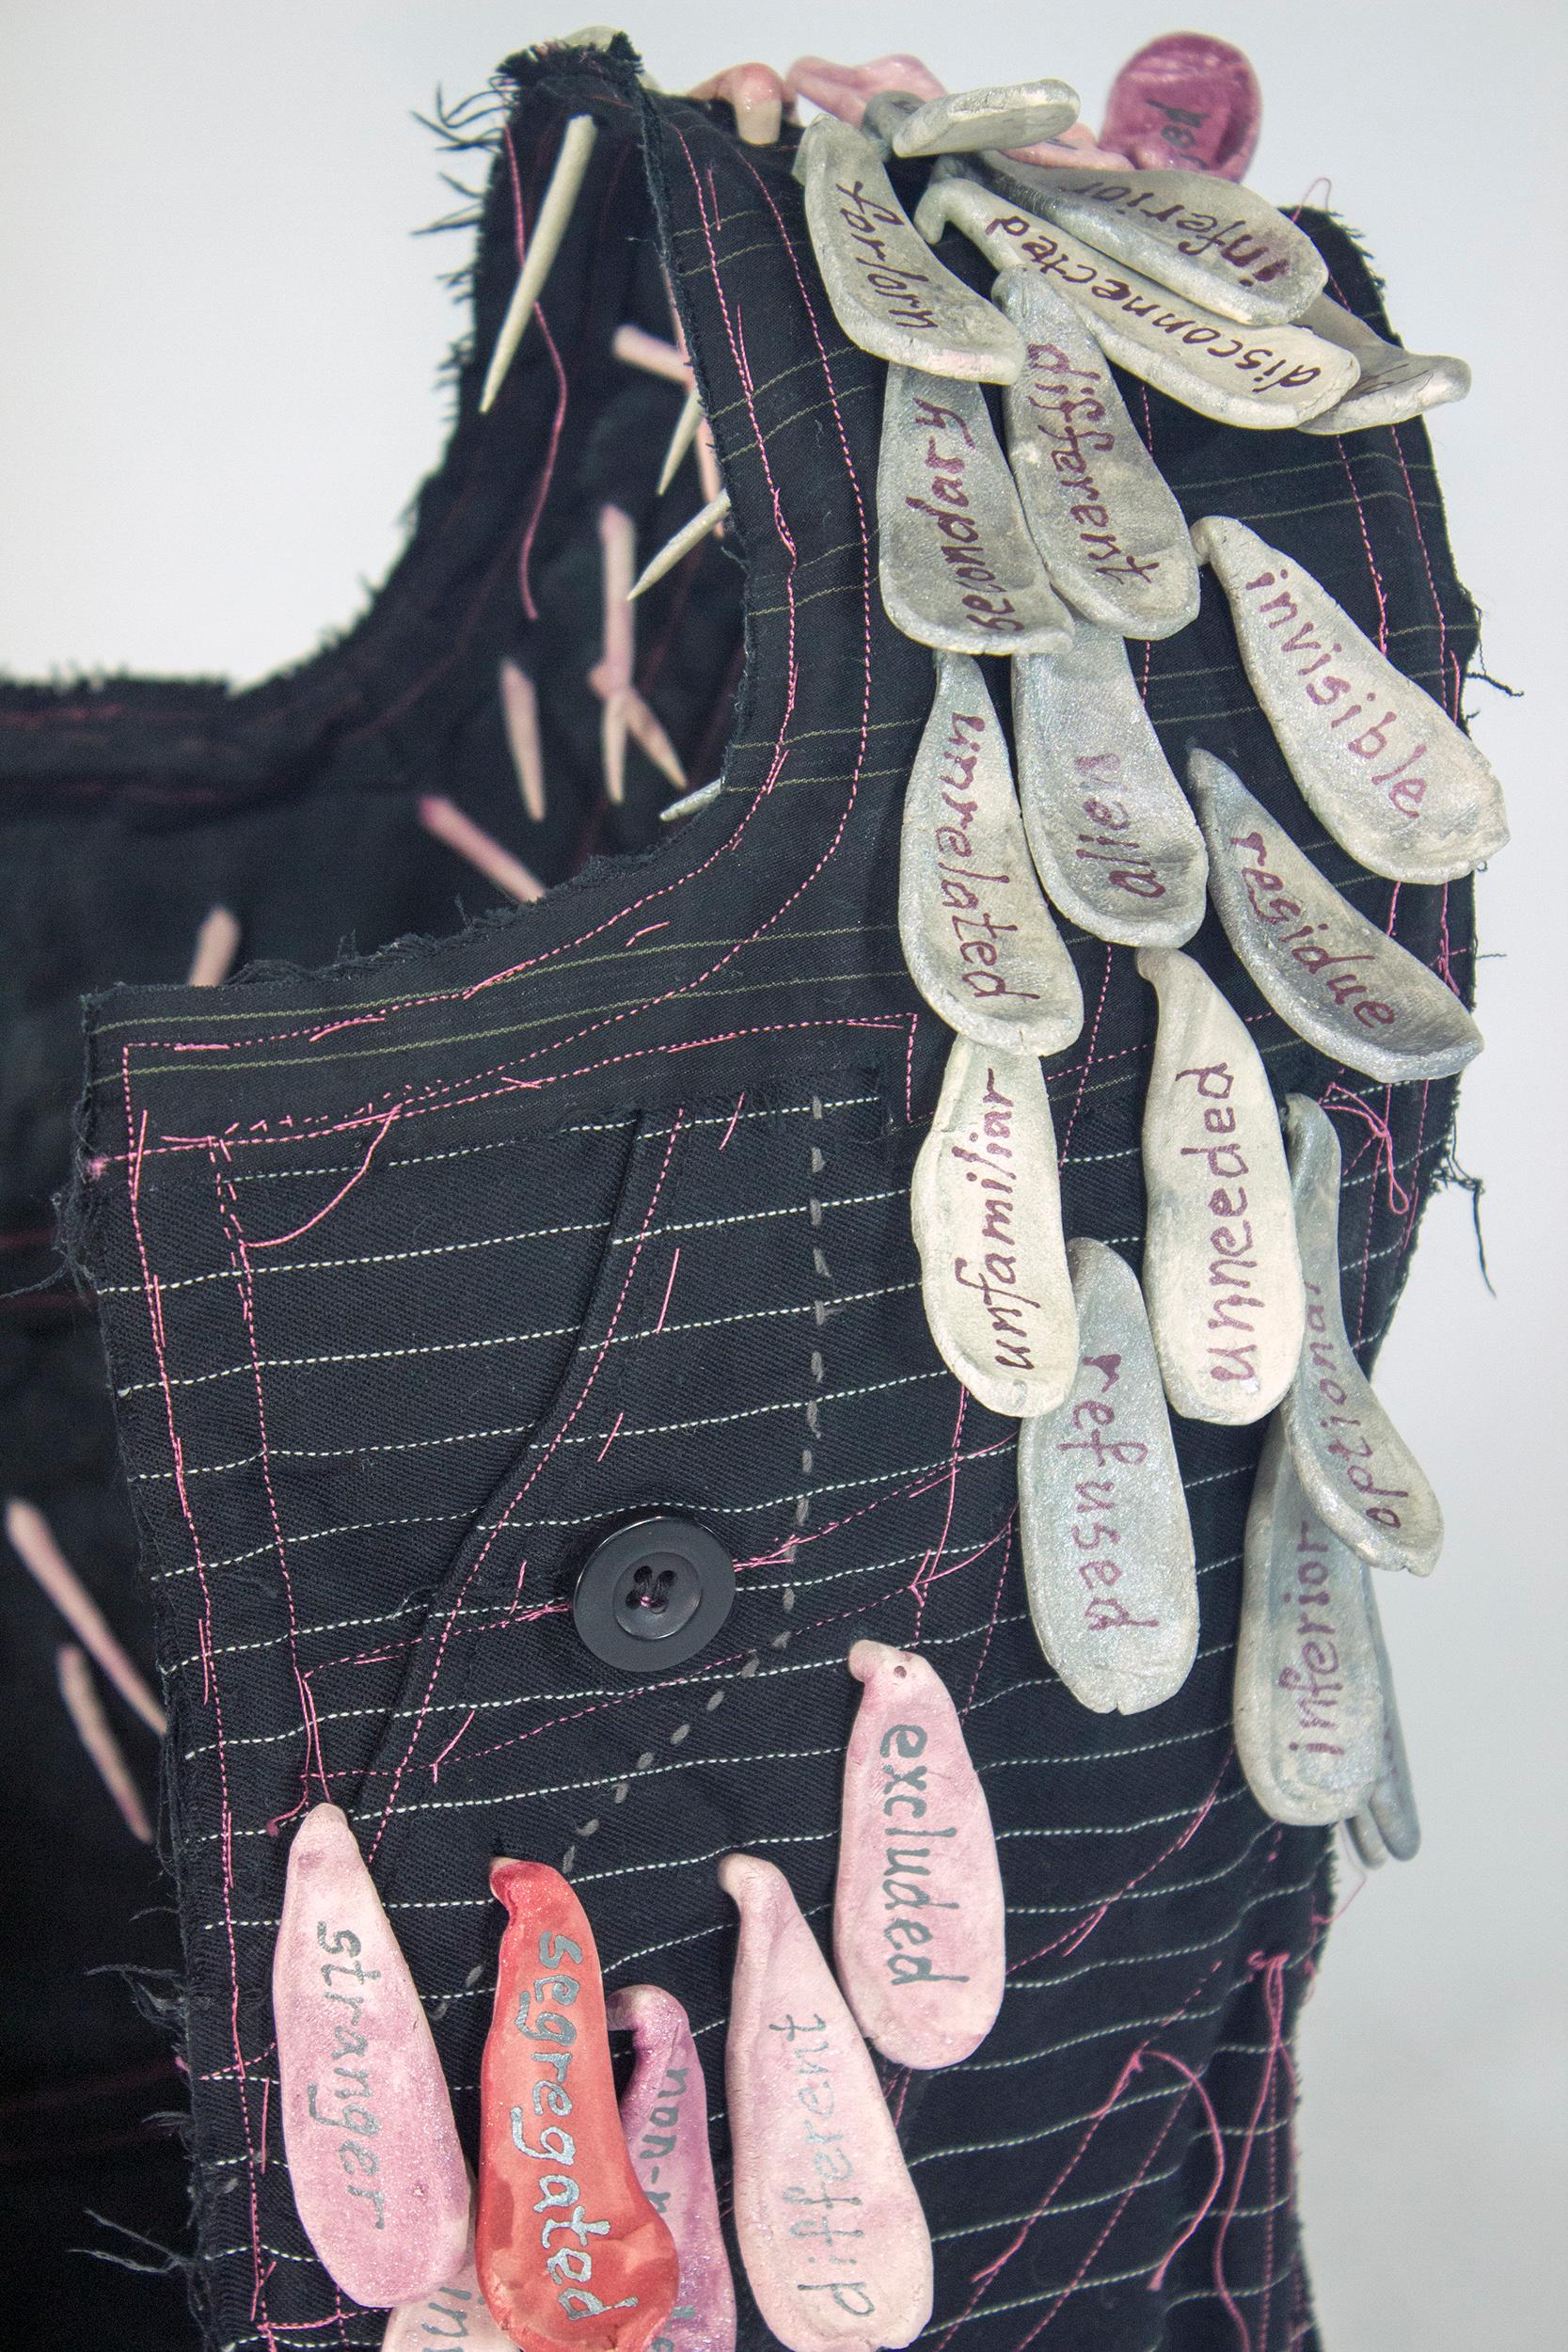 Virginia Mahoney’s “Other” is a mixed-media sculpture in vest form that is black with white and grey pinstripes, and has attached ceramic tags in various shades of pink, on which words referring to being ostracized or not included are handwritten.